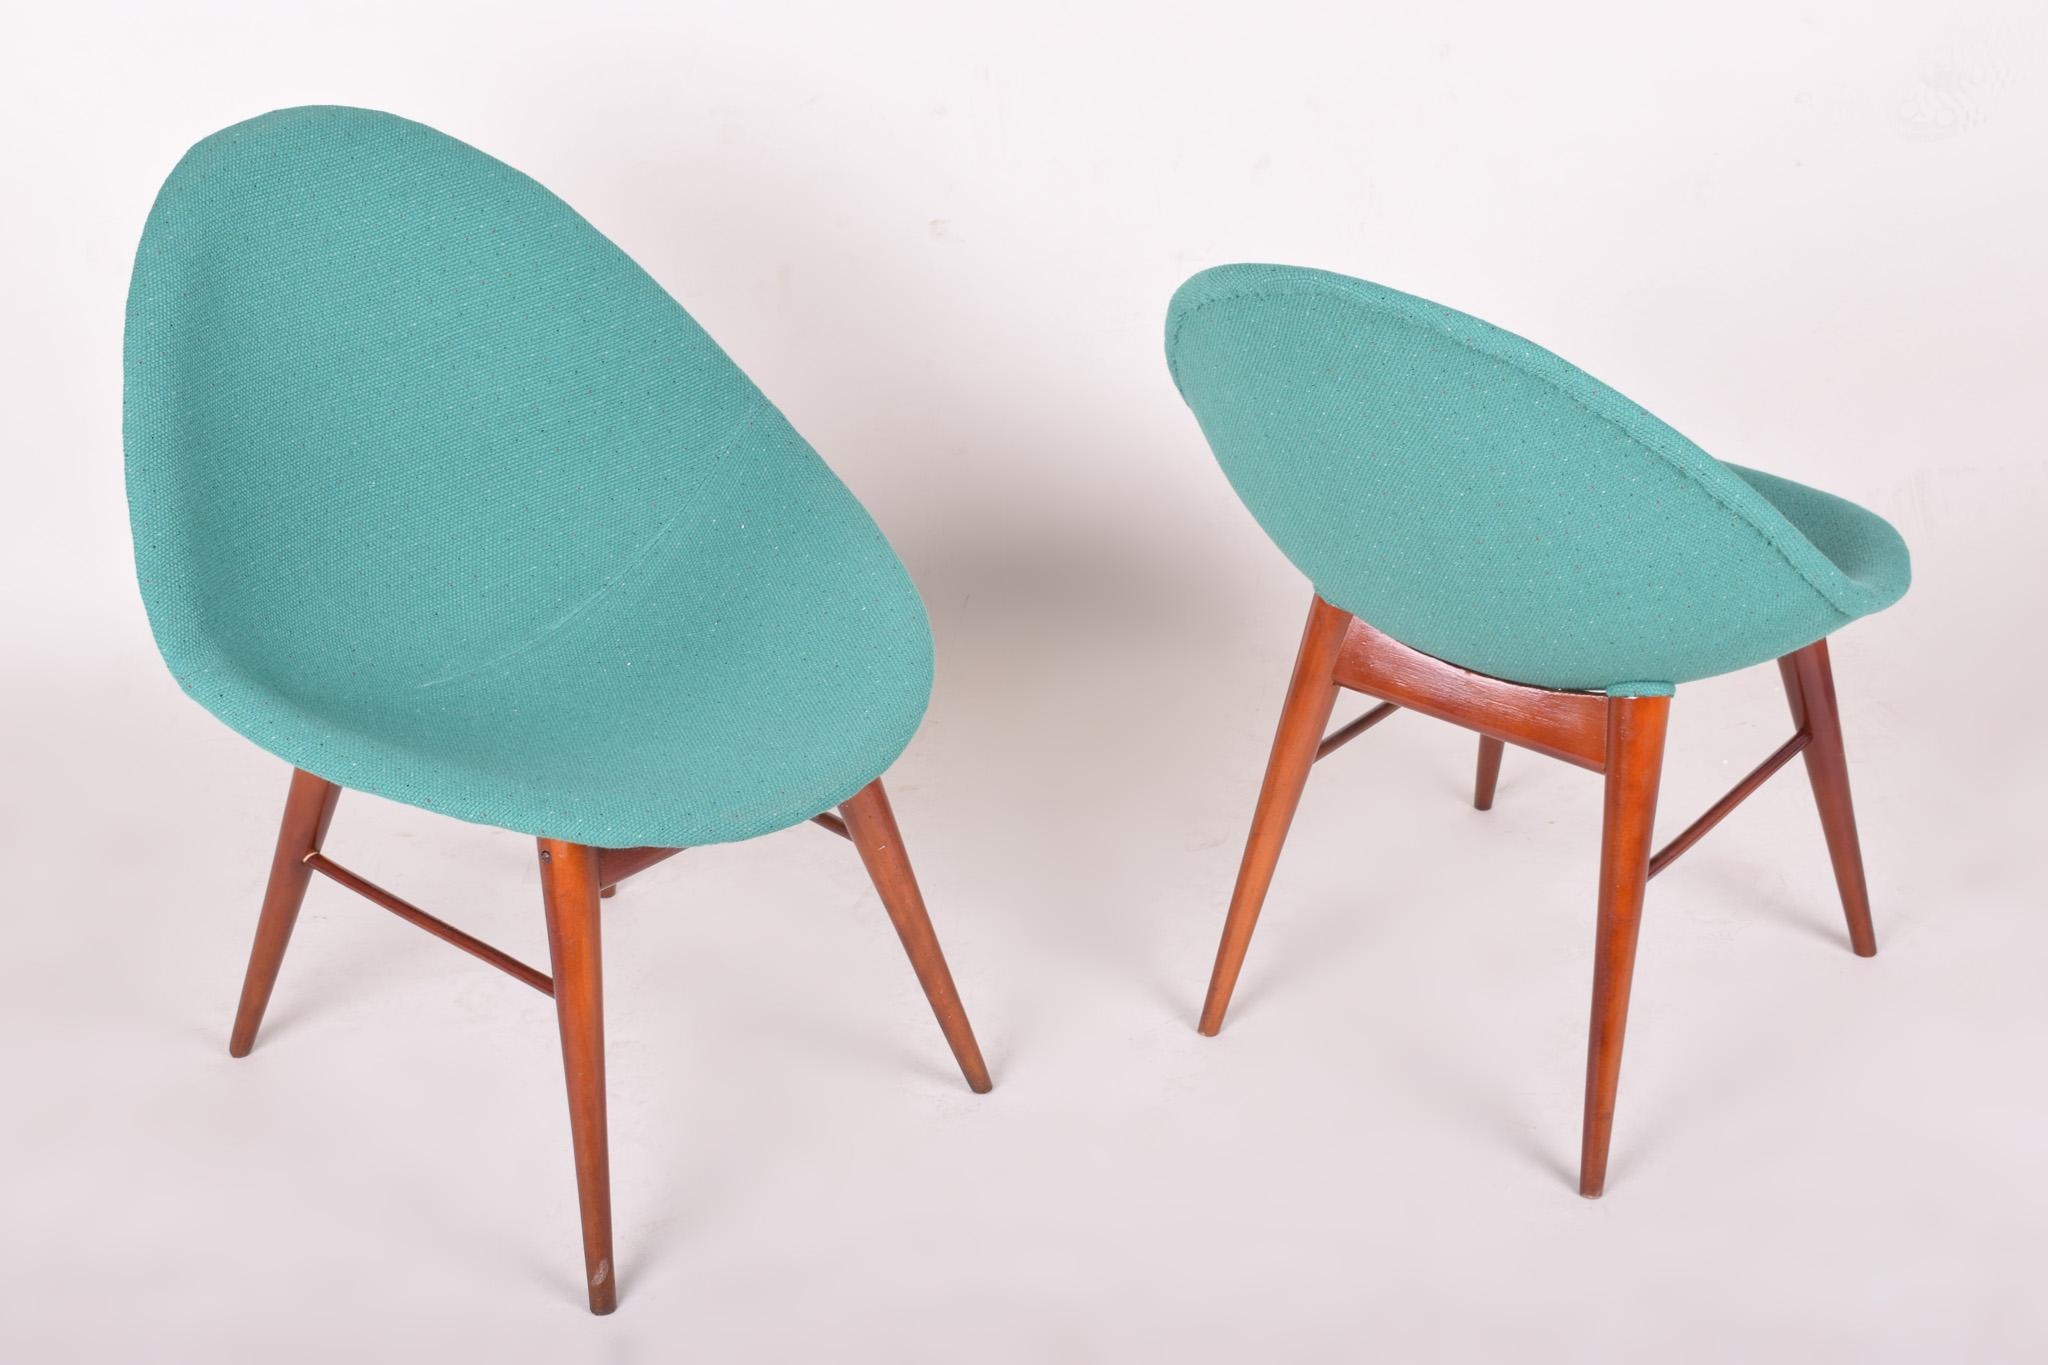 Fabric Pair of Blue Mid-Century Chairs, Made in 1960s Czechia, Fully Restored, Navrátil For Sale